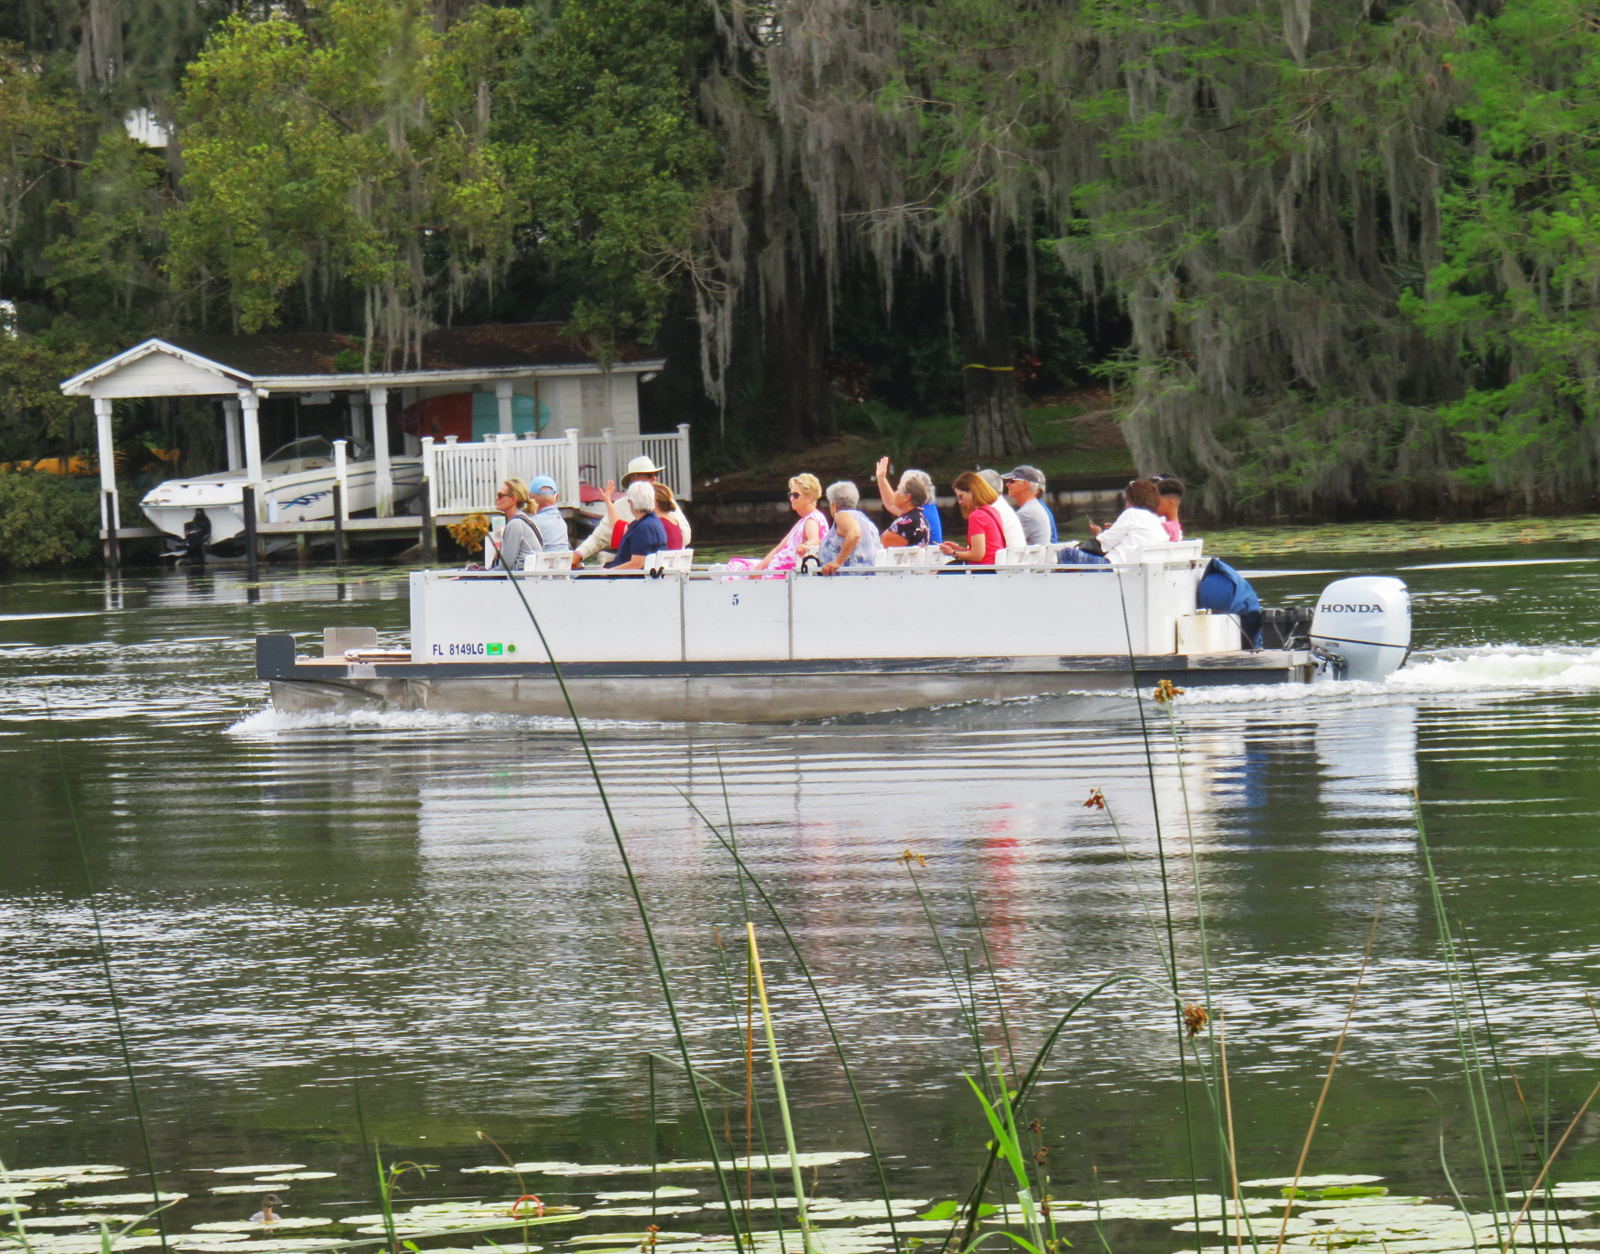 hings to do in Winter Park: The Winter Park Scenic Boat Tour scoots around the chain of lakes in a 60-minute tour. (Photo: David Blasco) 